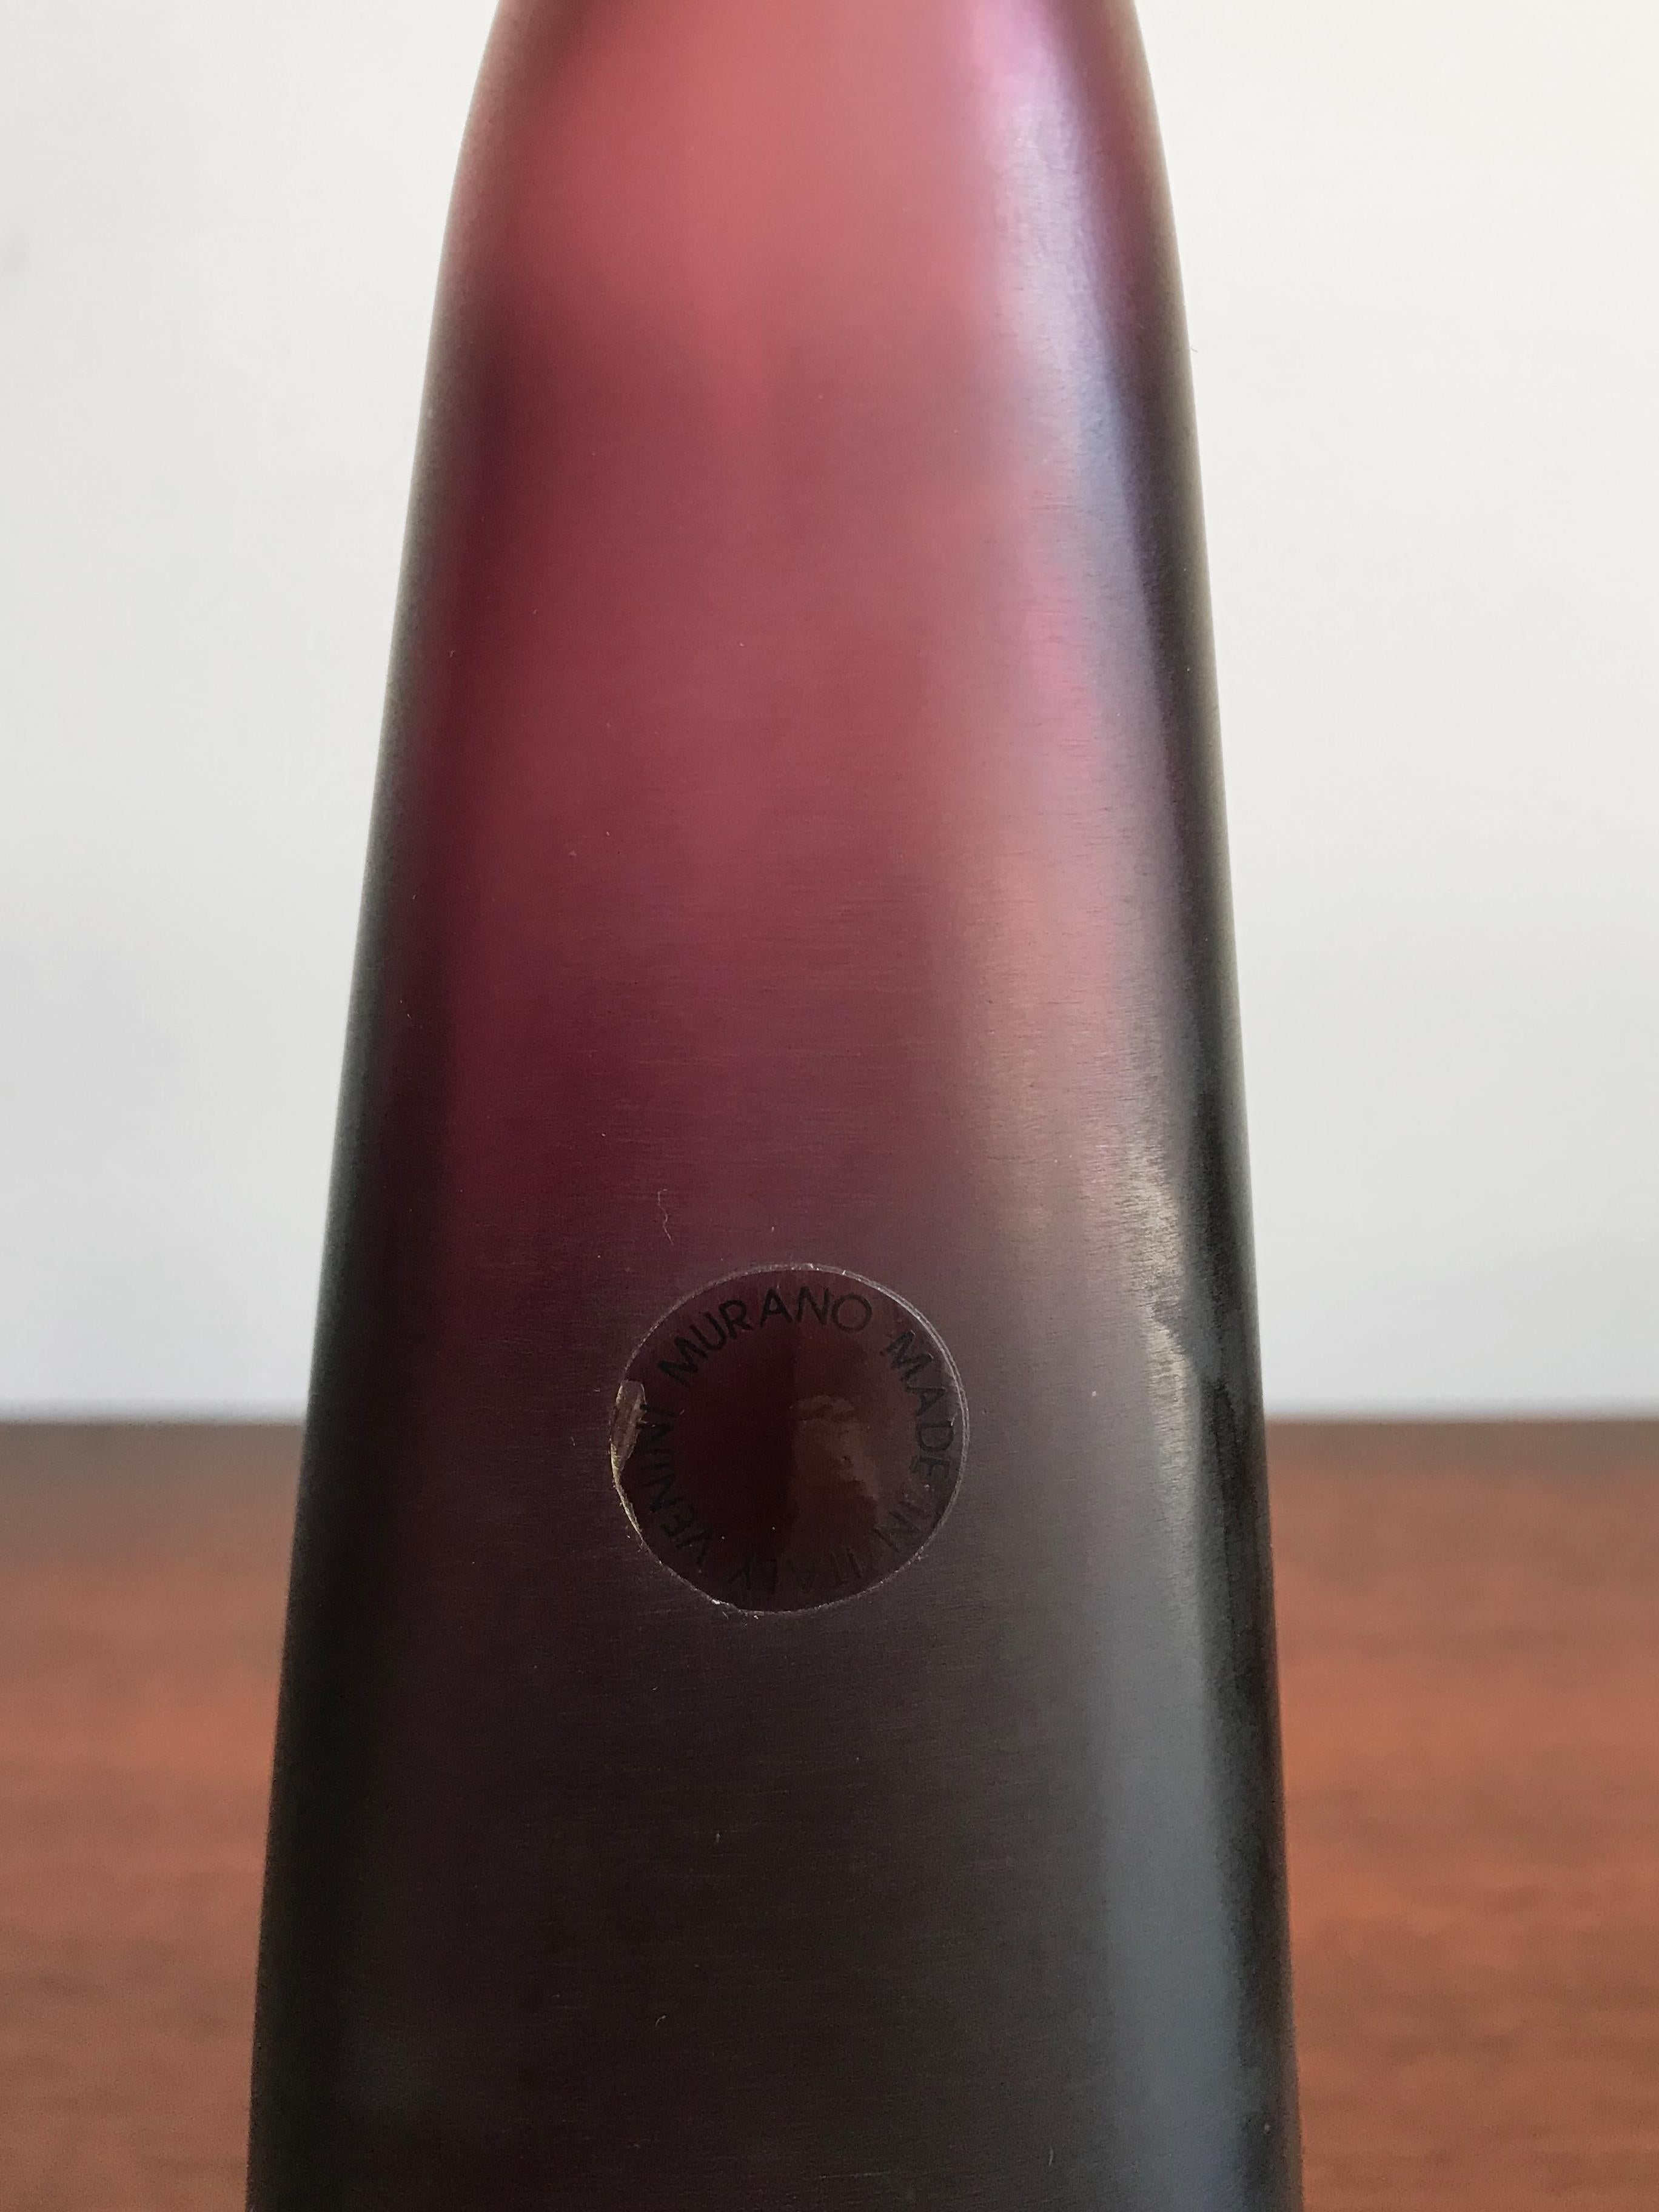 Amazing and fabulous very rare Italian handmade and blown bottle in bordeaux color glass with stopper, from the “Velati” series designed and produced by Venini Murano in 1995.

Logo Venini 1995 engraved by the producer on the bottom.
 